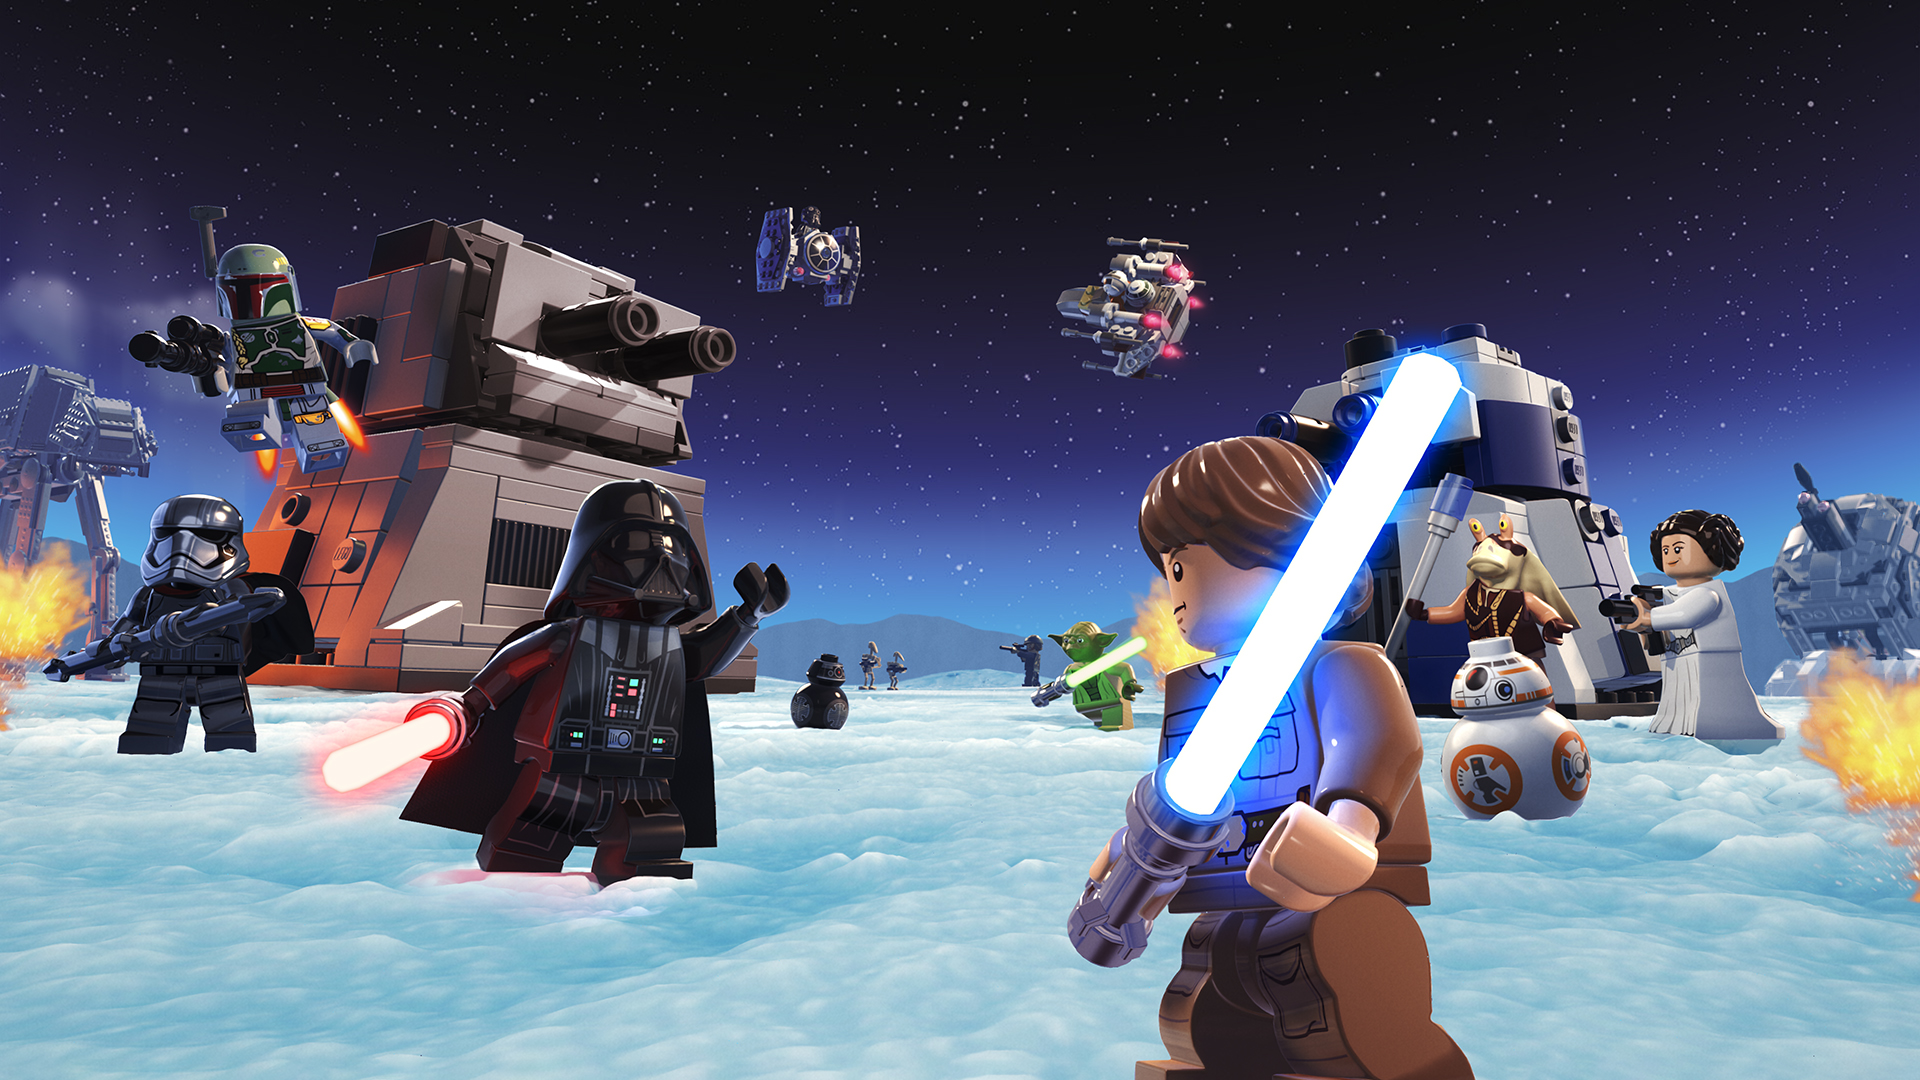 Afslut Pioner Arashigaoka Apple Arcade on Twitter: "Coming Soon to Apple Arcade: LEGO @StarWars  Battles Lead your favorite LEGO Star Wars characters into real-time,  multiplayer battles throughout the @LSWGame galaxy! ⏰ Set a reminder:  https://t.co/NRwZYnCfDE